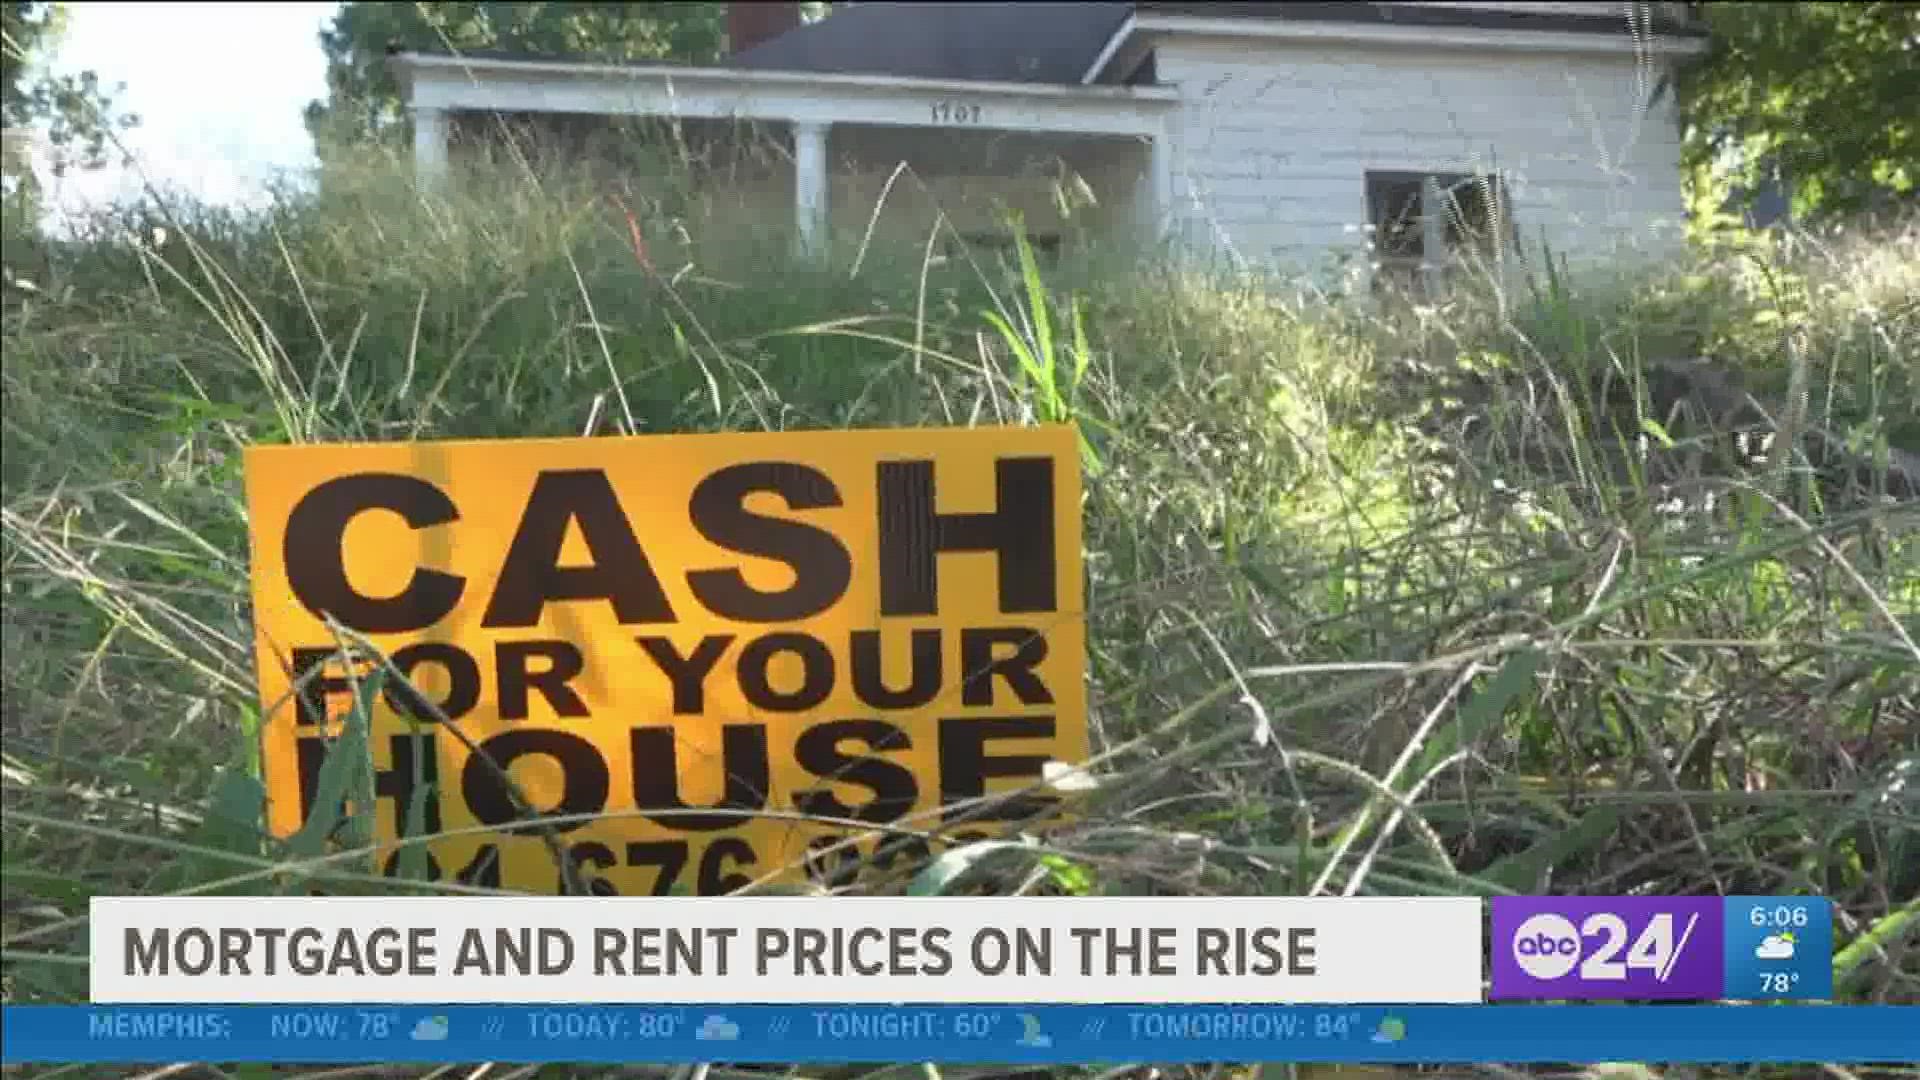 "If this trend continues - within the next two years, most people in Memphis will not be able to purchase a home. They will be forced to rent," said Javier Bailey.